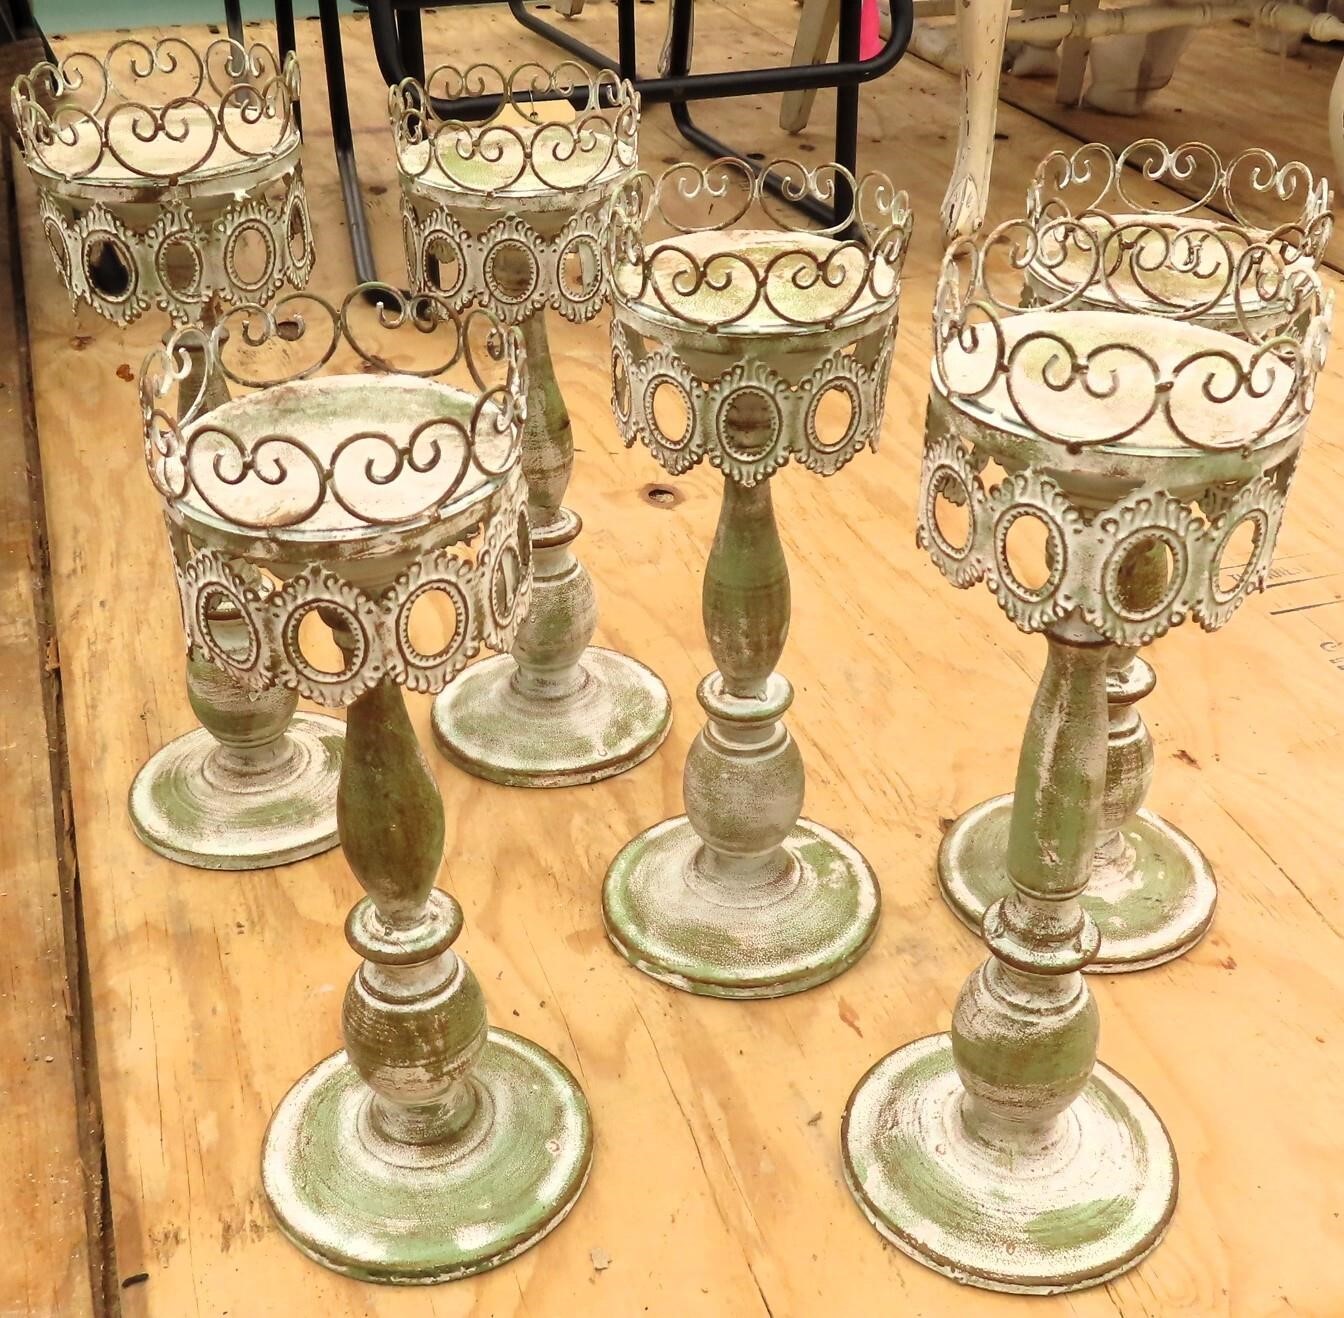 Six (6) Metal Candle Holders, 14"H